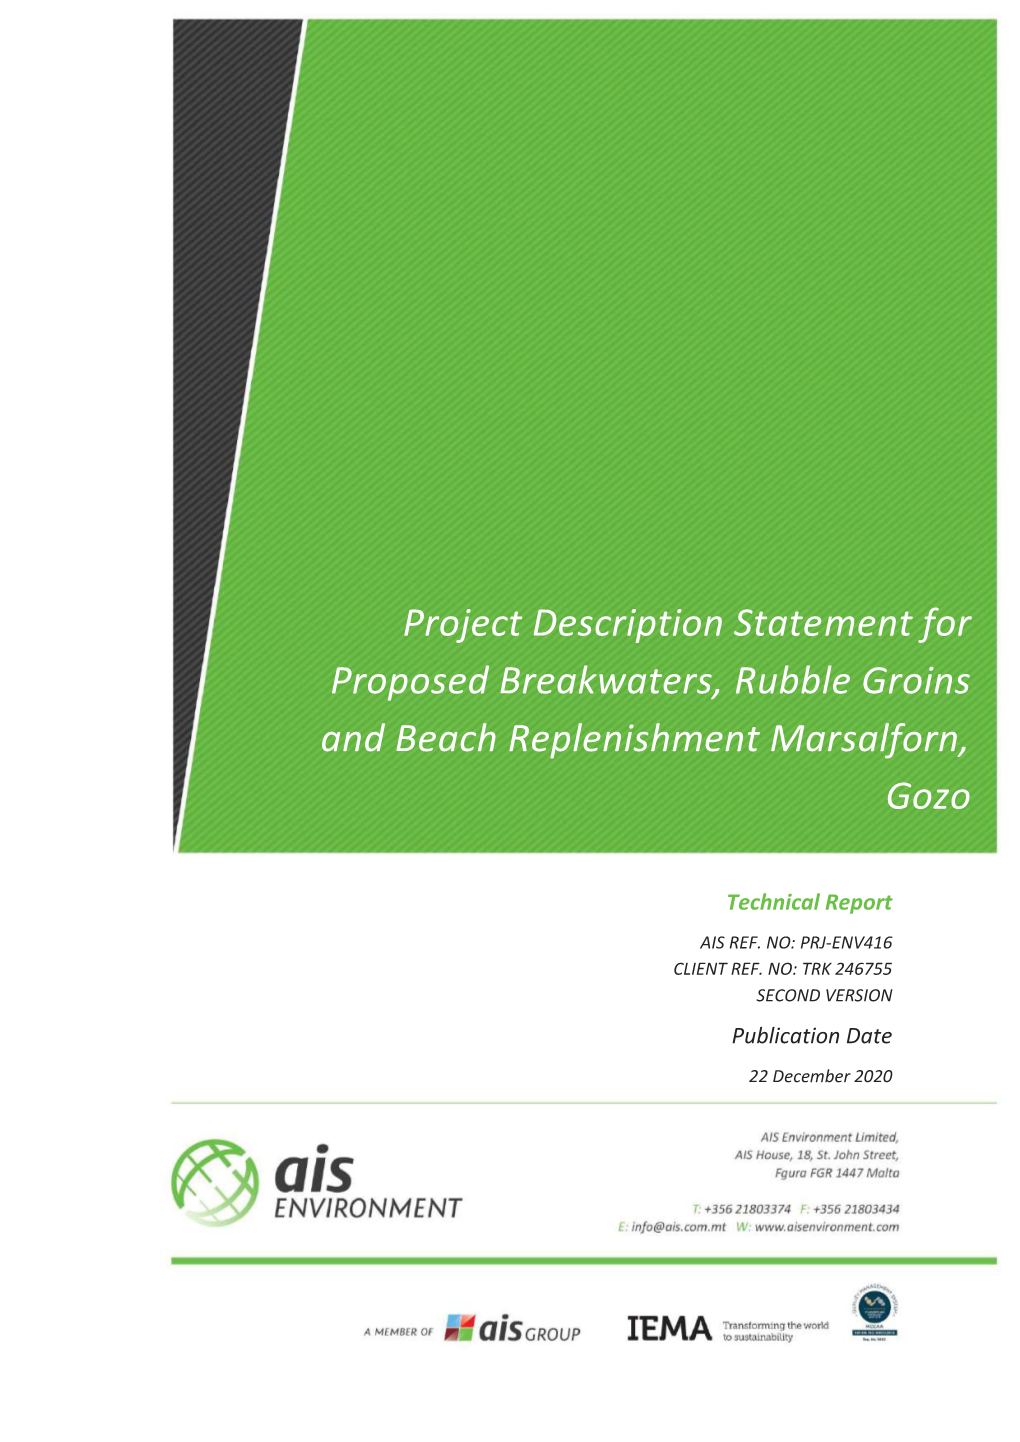 Project Description Statement for Proposed Breakwaters, Rubble Groins and Beach Replenishment Marsalforn, Gozo